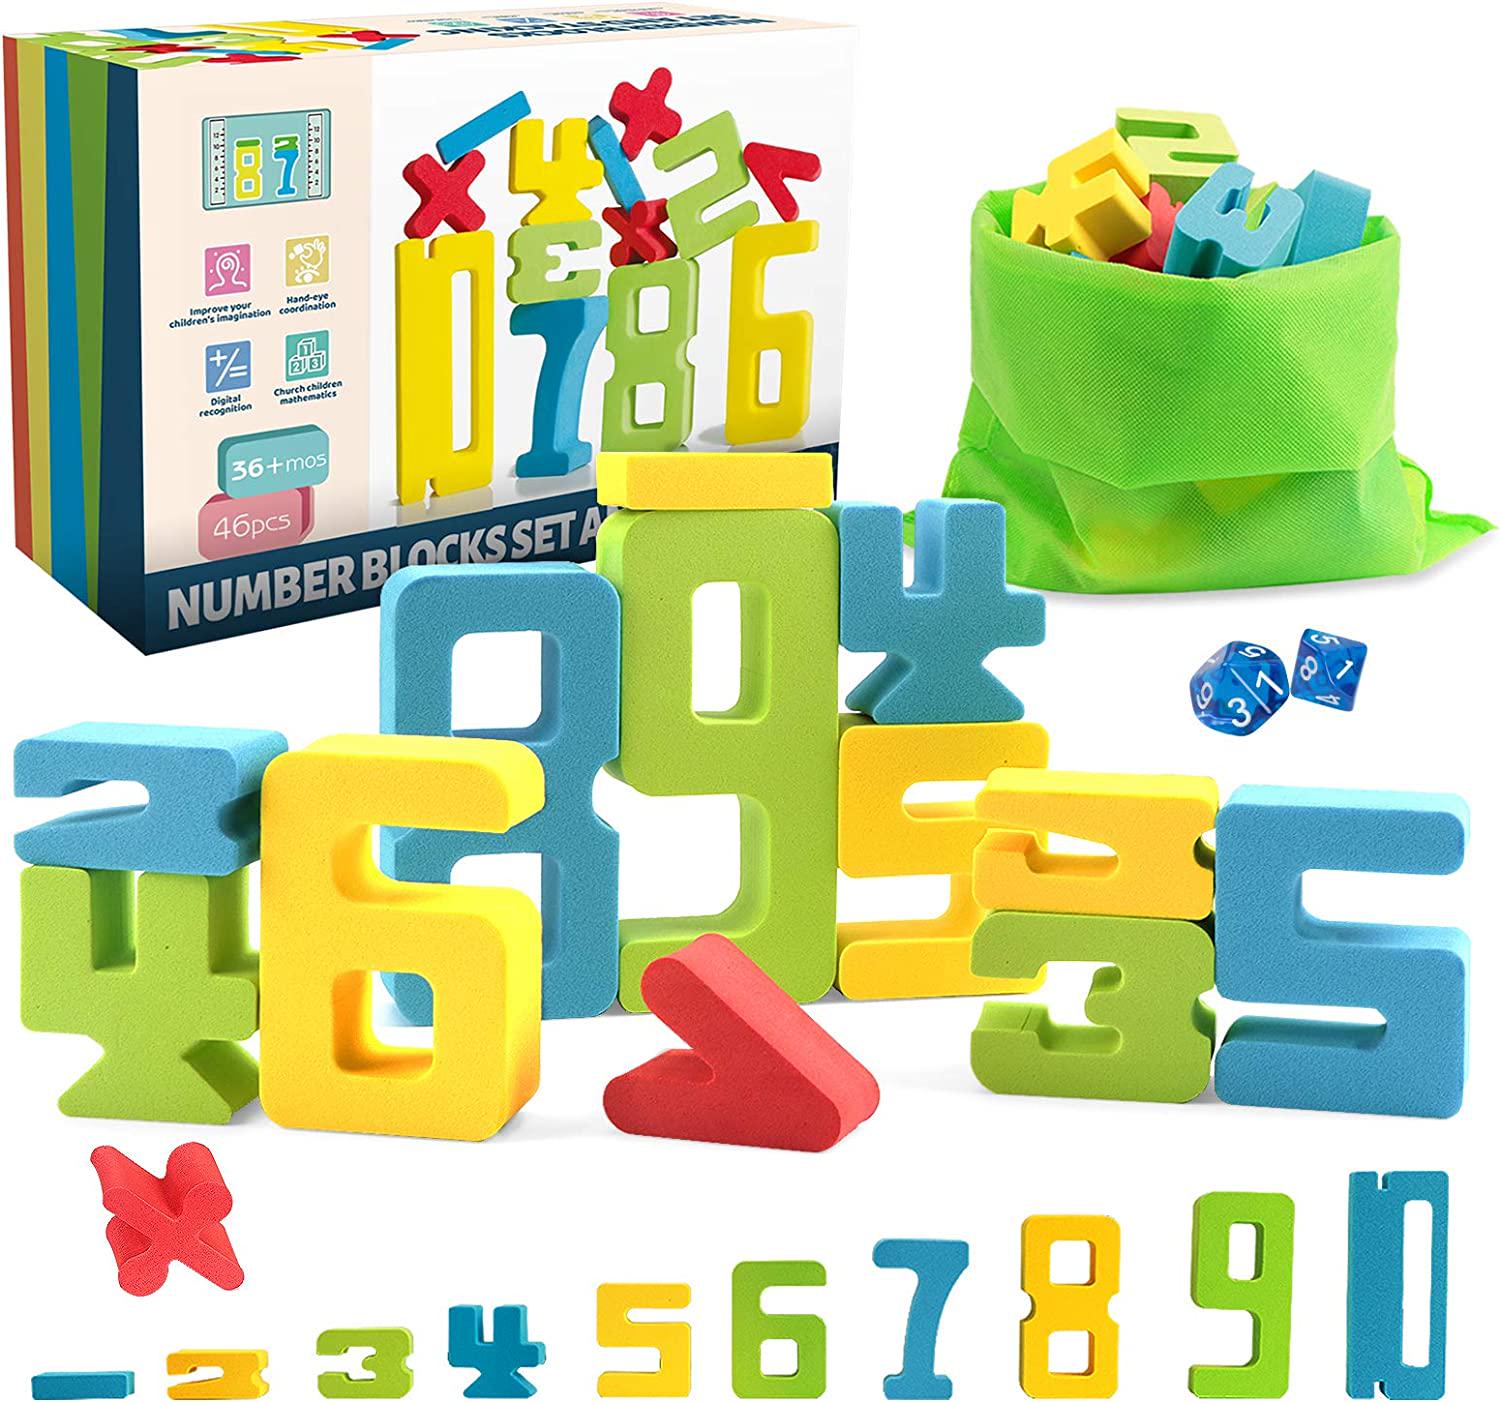 kindersee, kindersee Math Building Blocks Educational Toys, Including Math Manipulatives, Balanced Stacking, Memory Training, Unique Number Blocks Educational Toys for 3 and up as Gifts, Party Games, Education